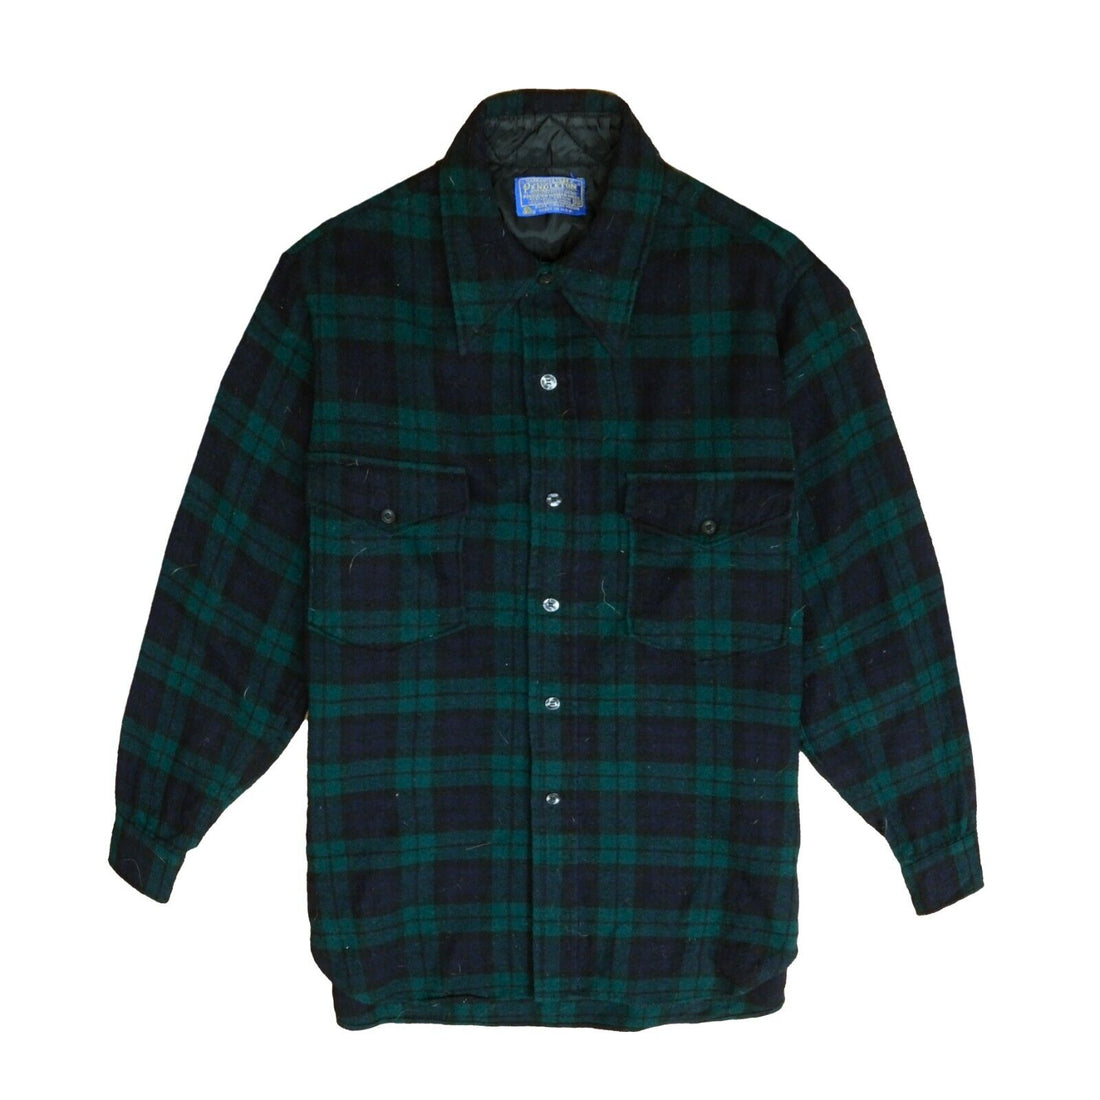 Vintage Pendleton Plaid Button Up Wool Field Shirt Size 15½ Green 90s